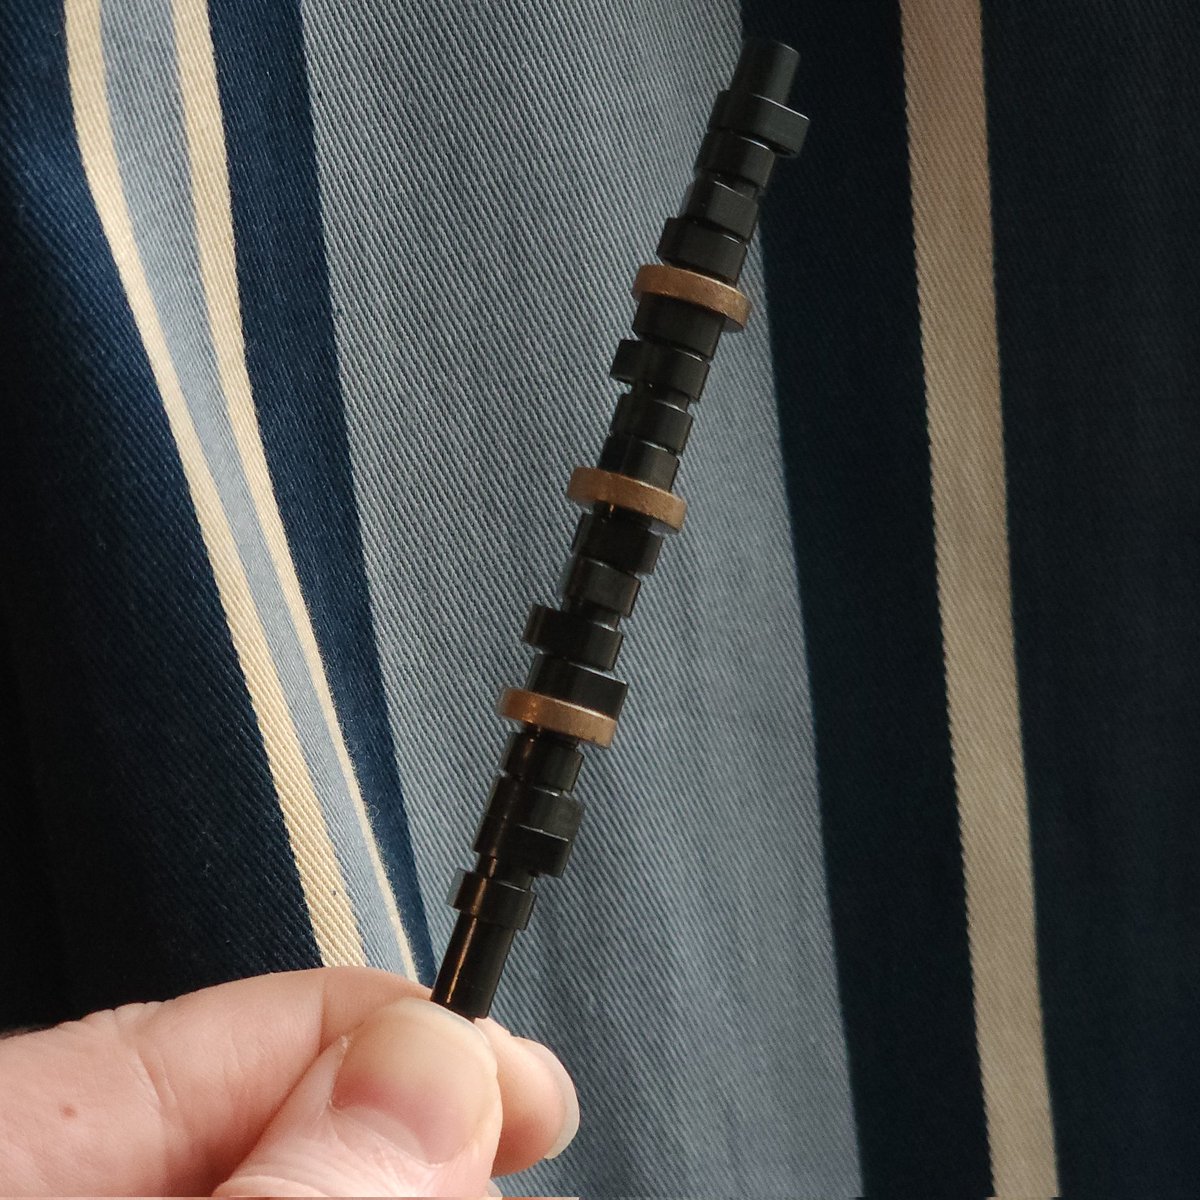 Well this is a very tiny camshaft